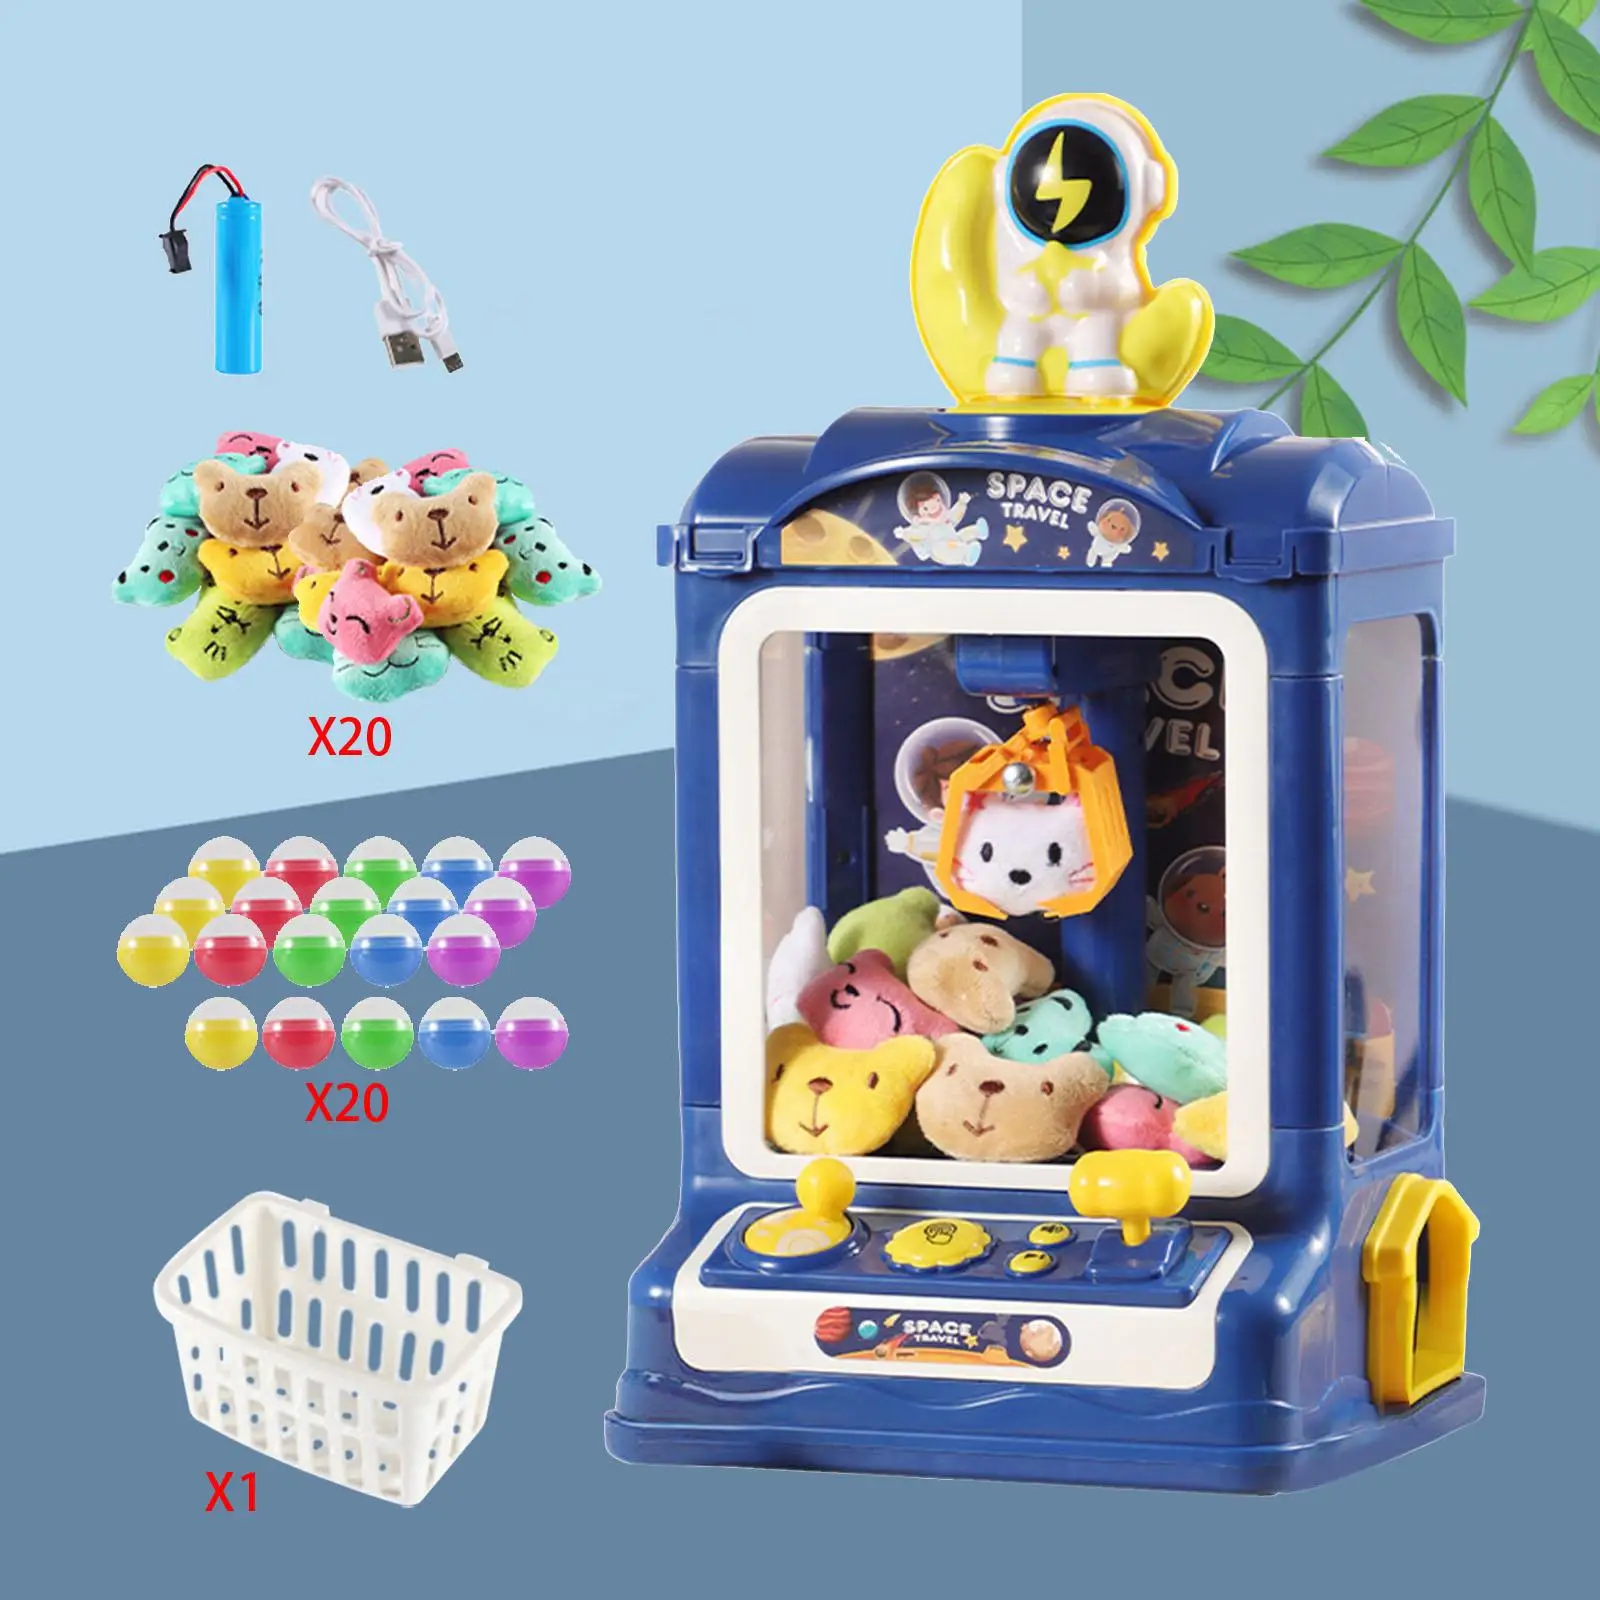 Kids Claw Machine Small Claw Game Grabbing Machine for Children Boys Gifts